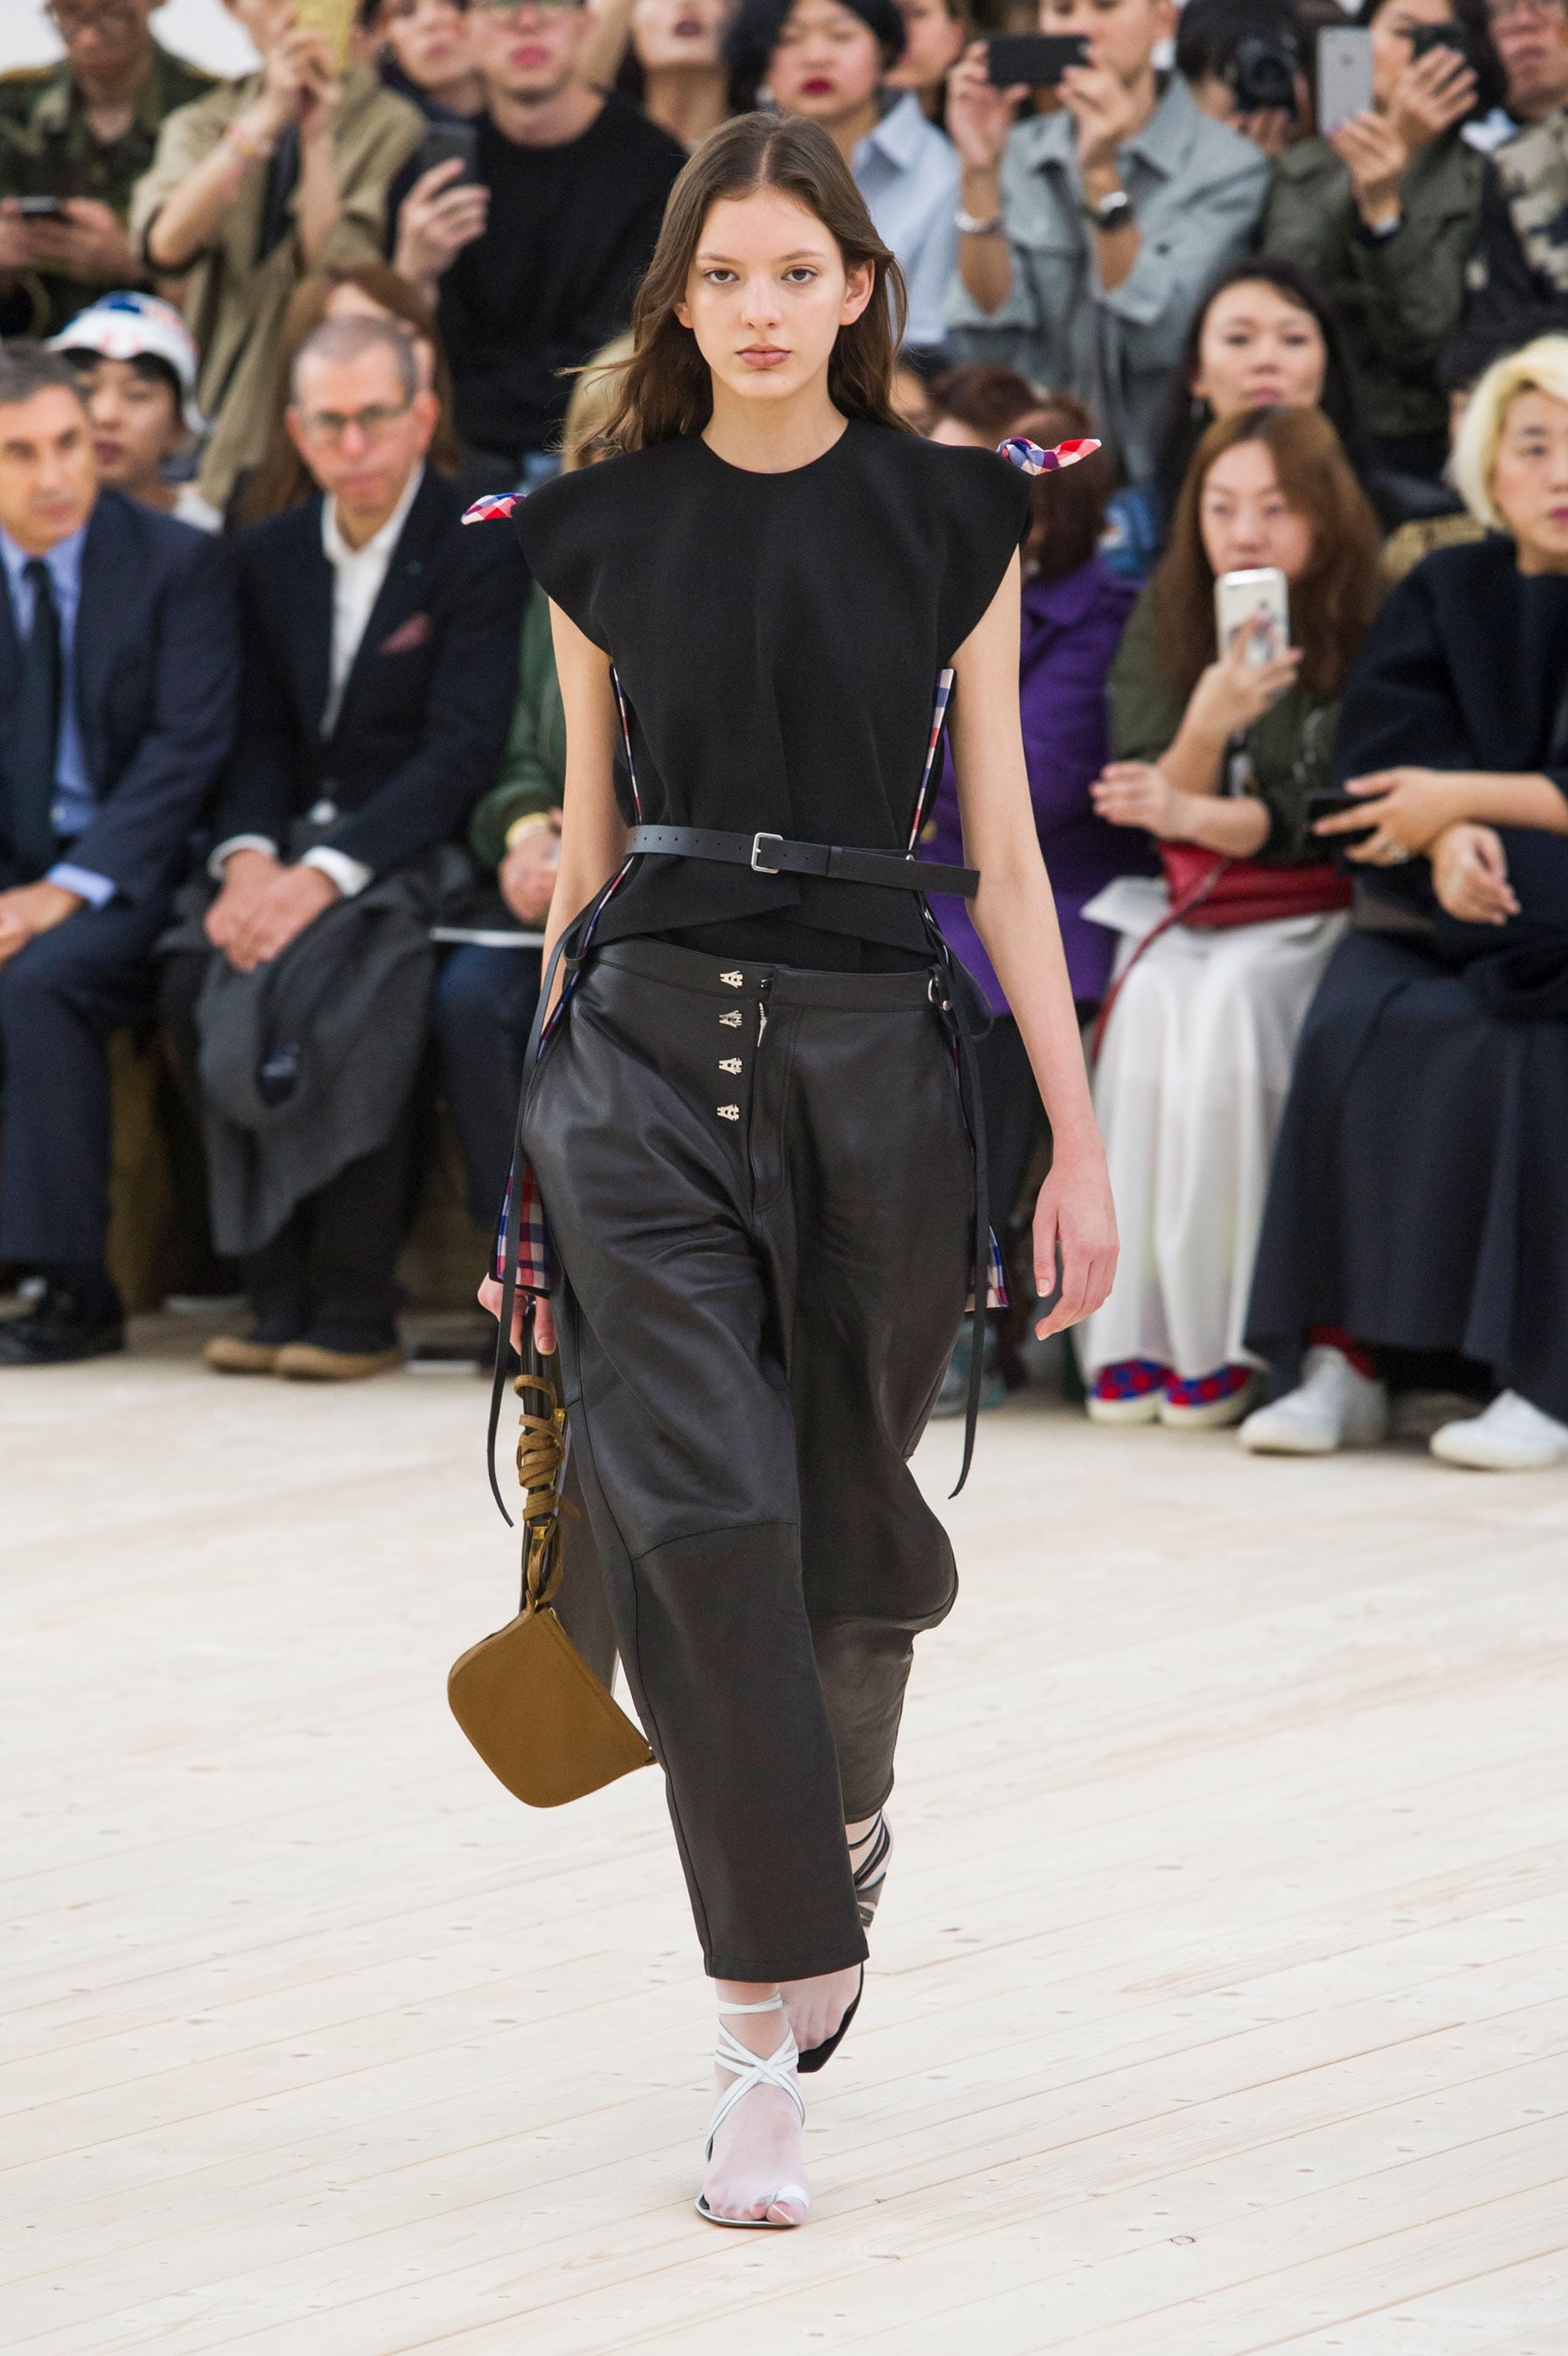 Fashion, Shopping & Style What's So Cool About Céline Anyway